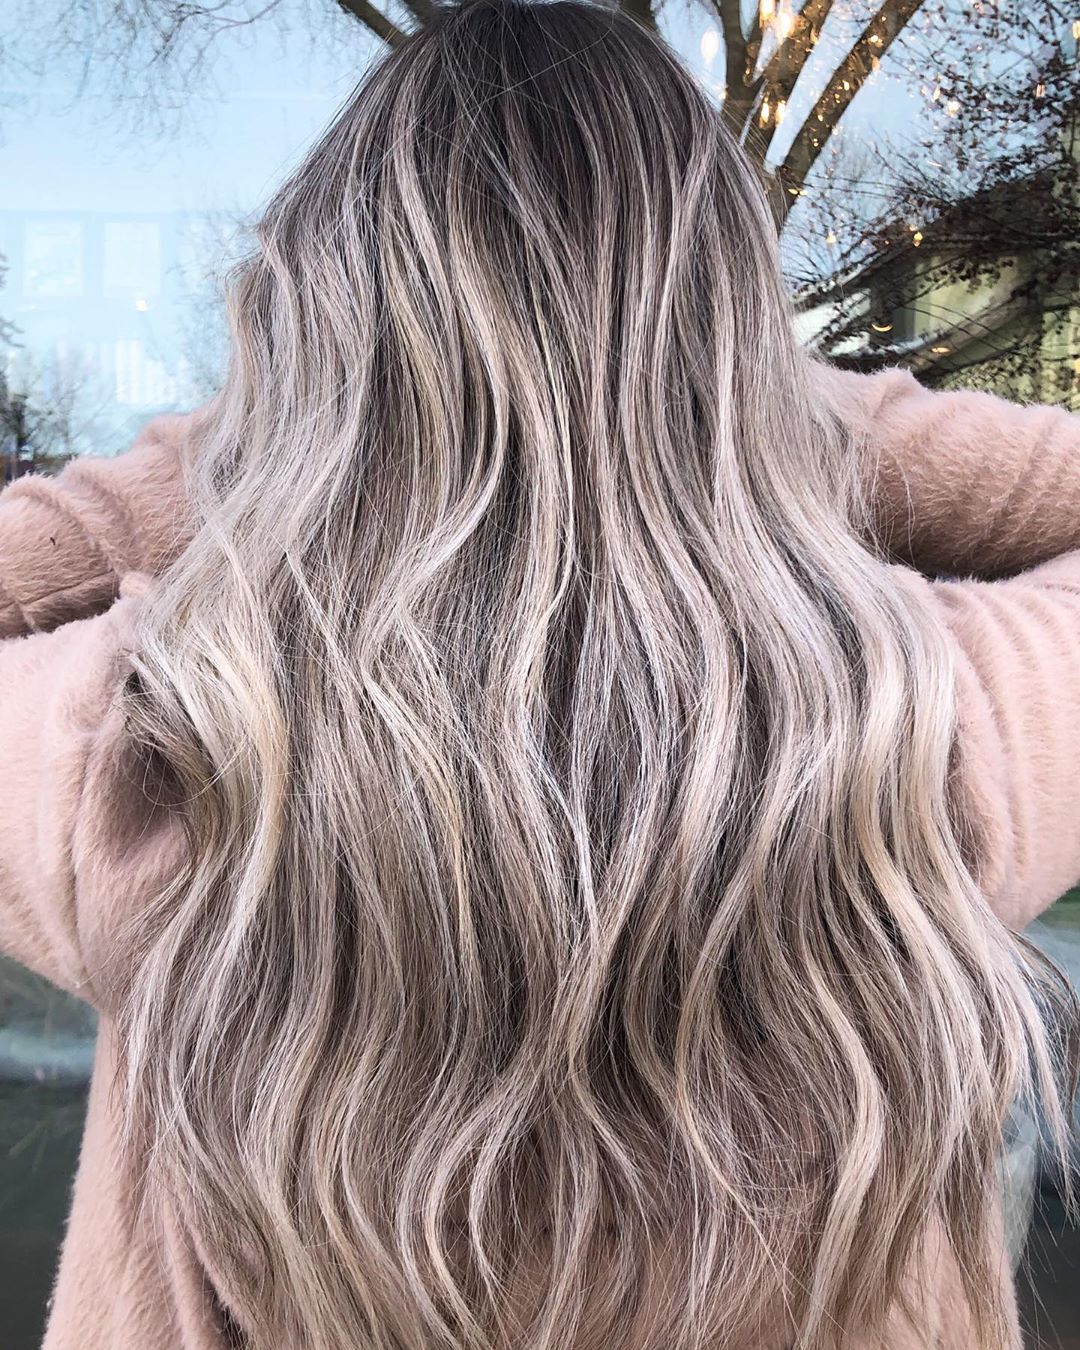 Image of dark roots on a blonde hair style